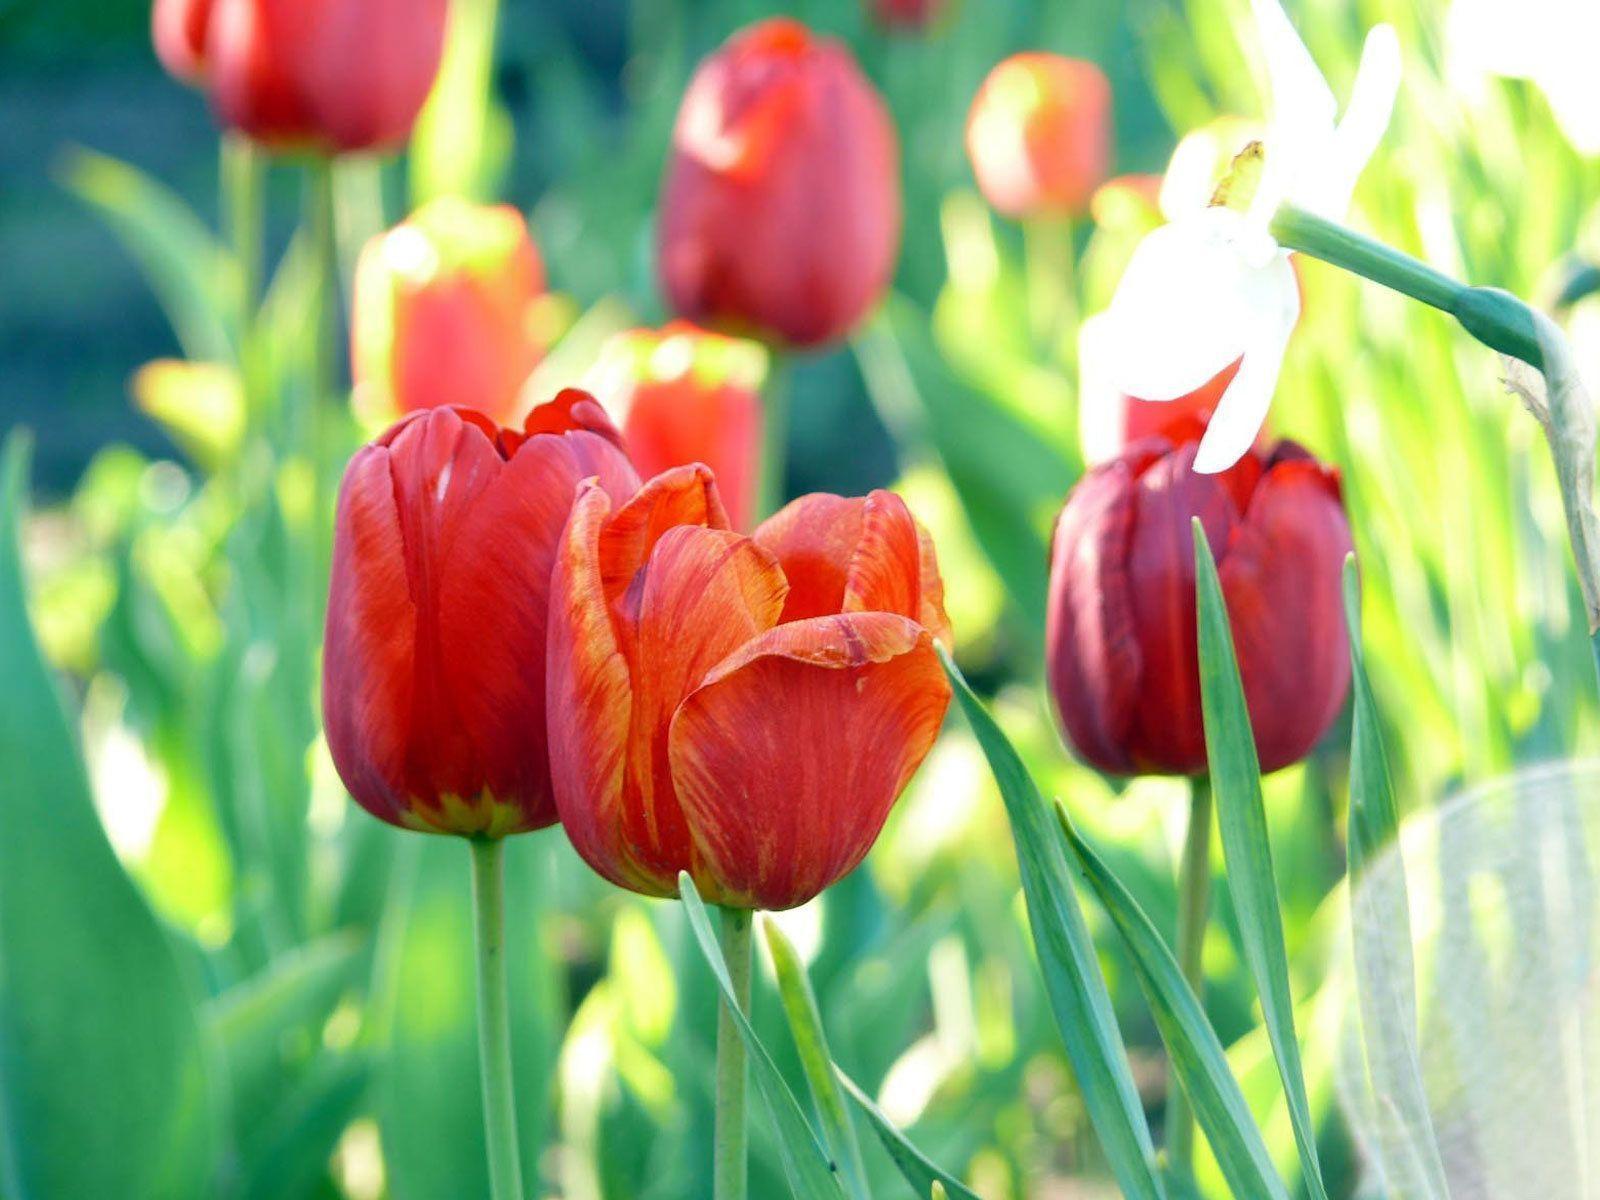 Red Tulips Wallpapers - Wallpaper Cave